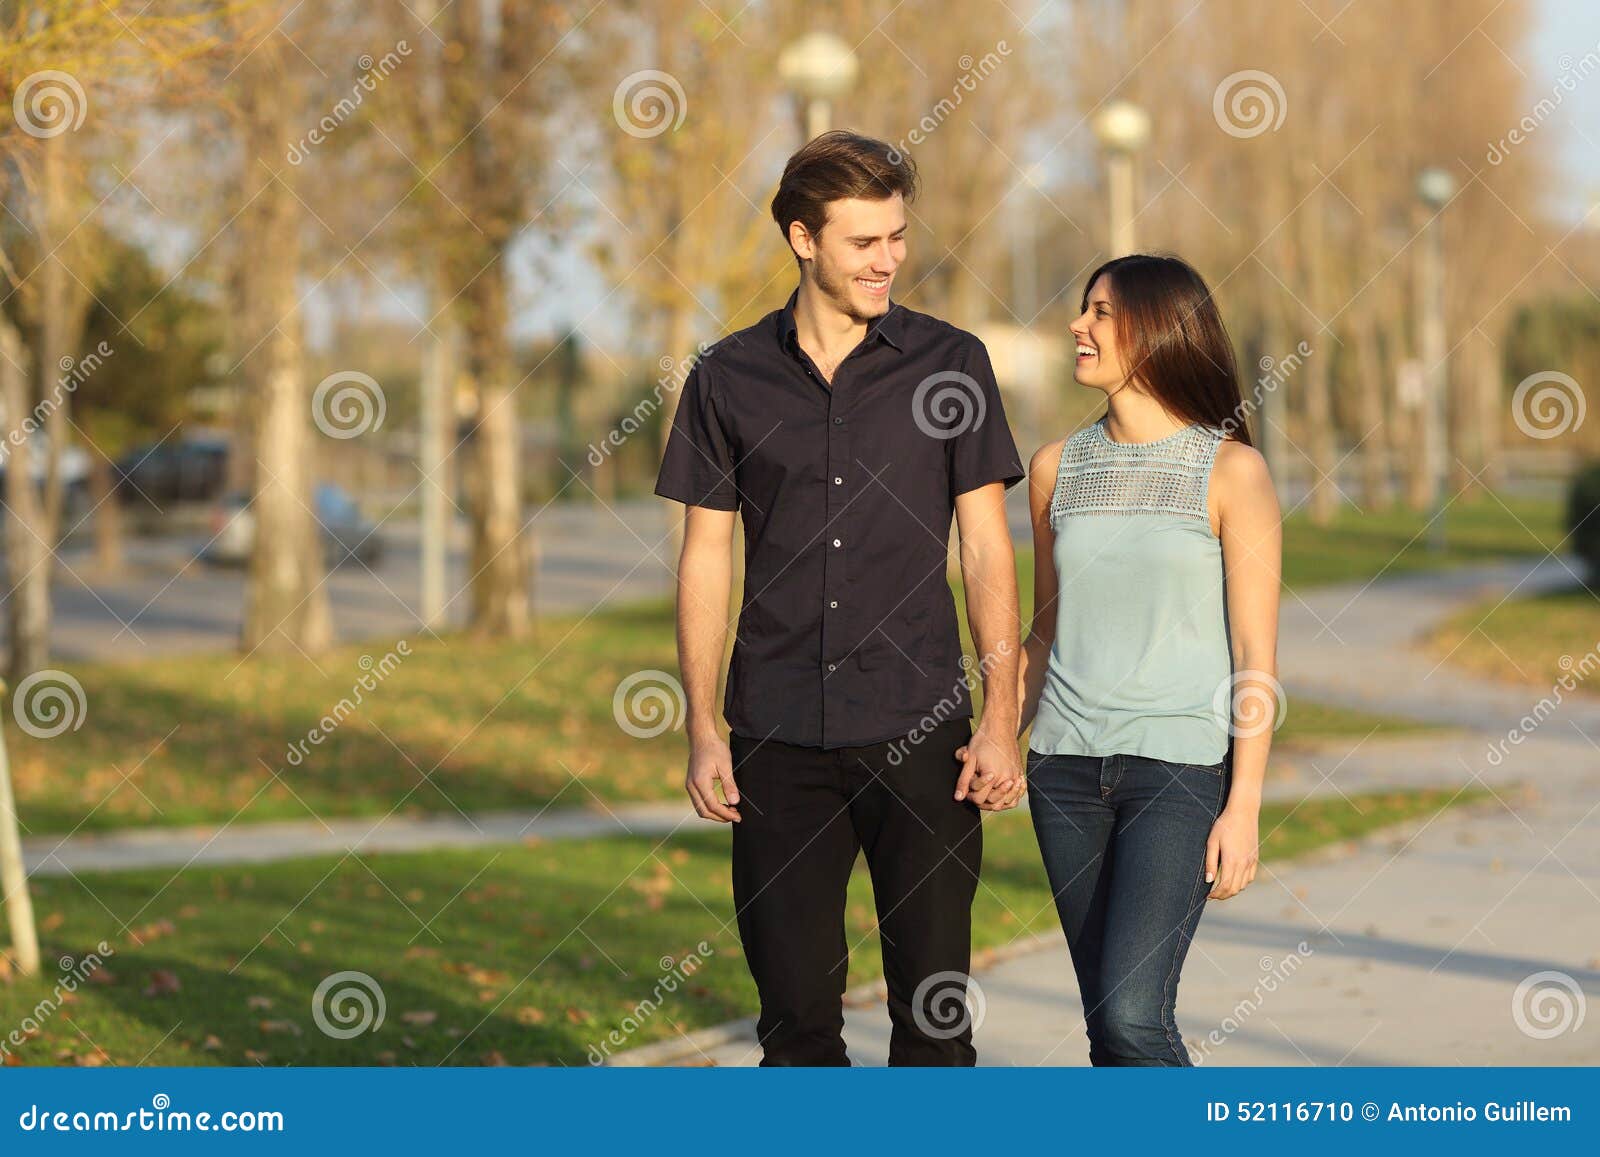 couple taking a walk in a park